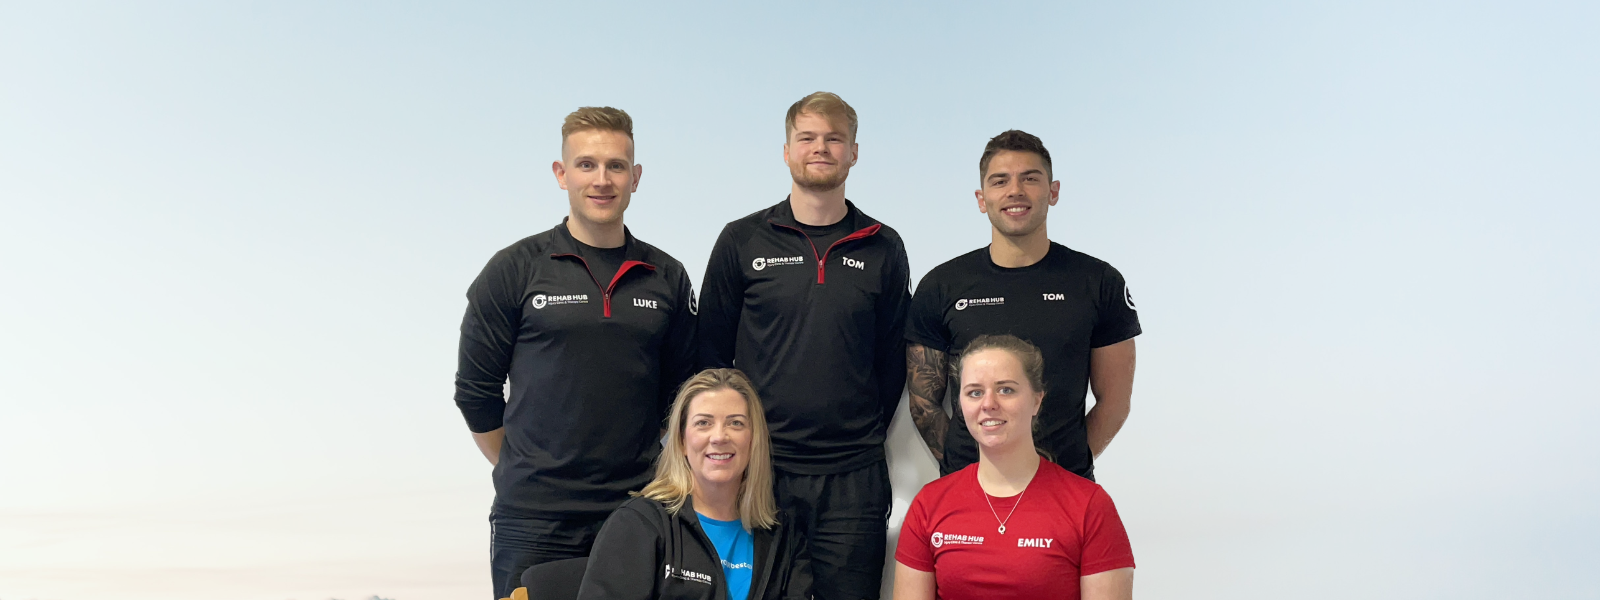 physiotherapy, sports therapy and osteopathy team photo